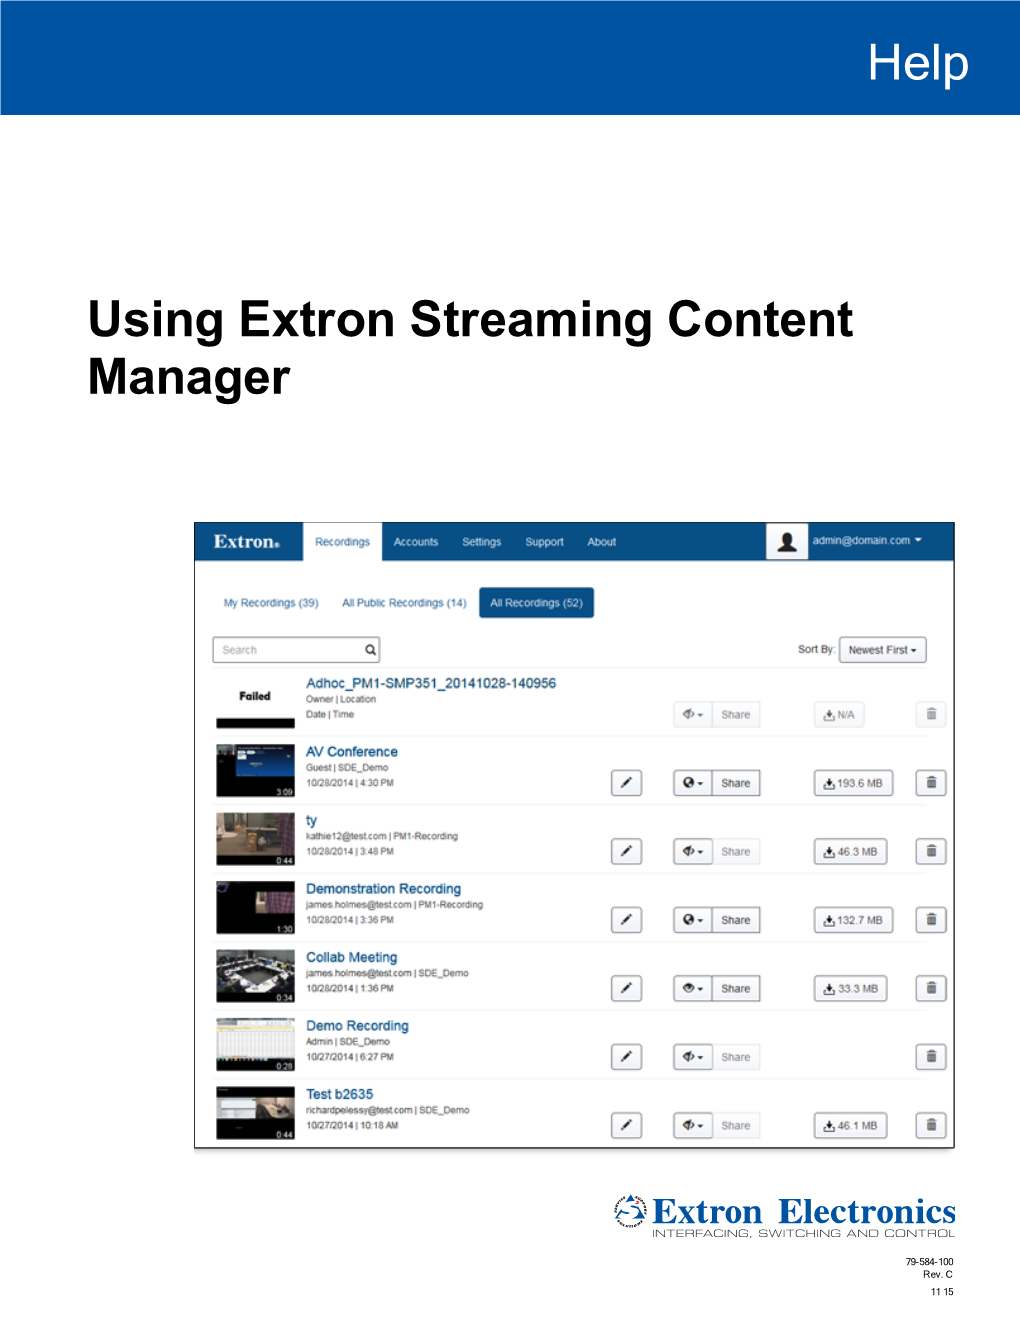 Using Extron Streaming Content Manager: a Help File